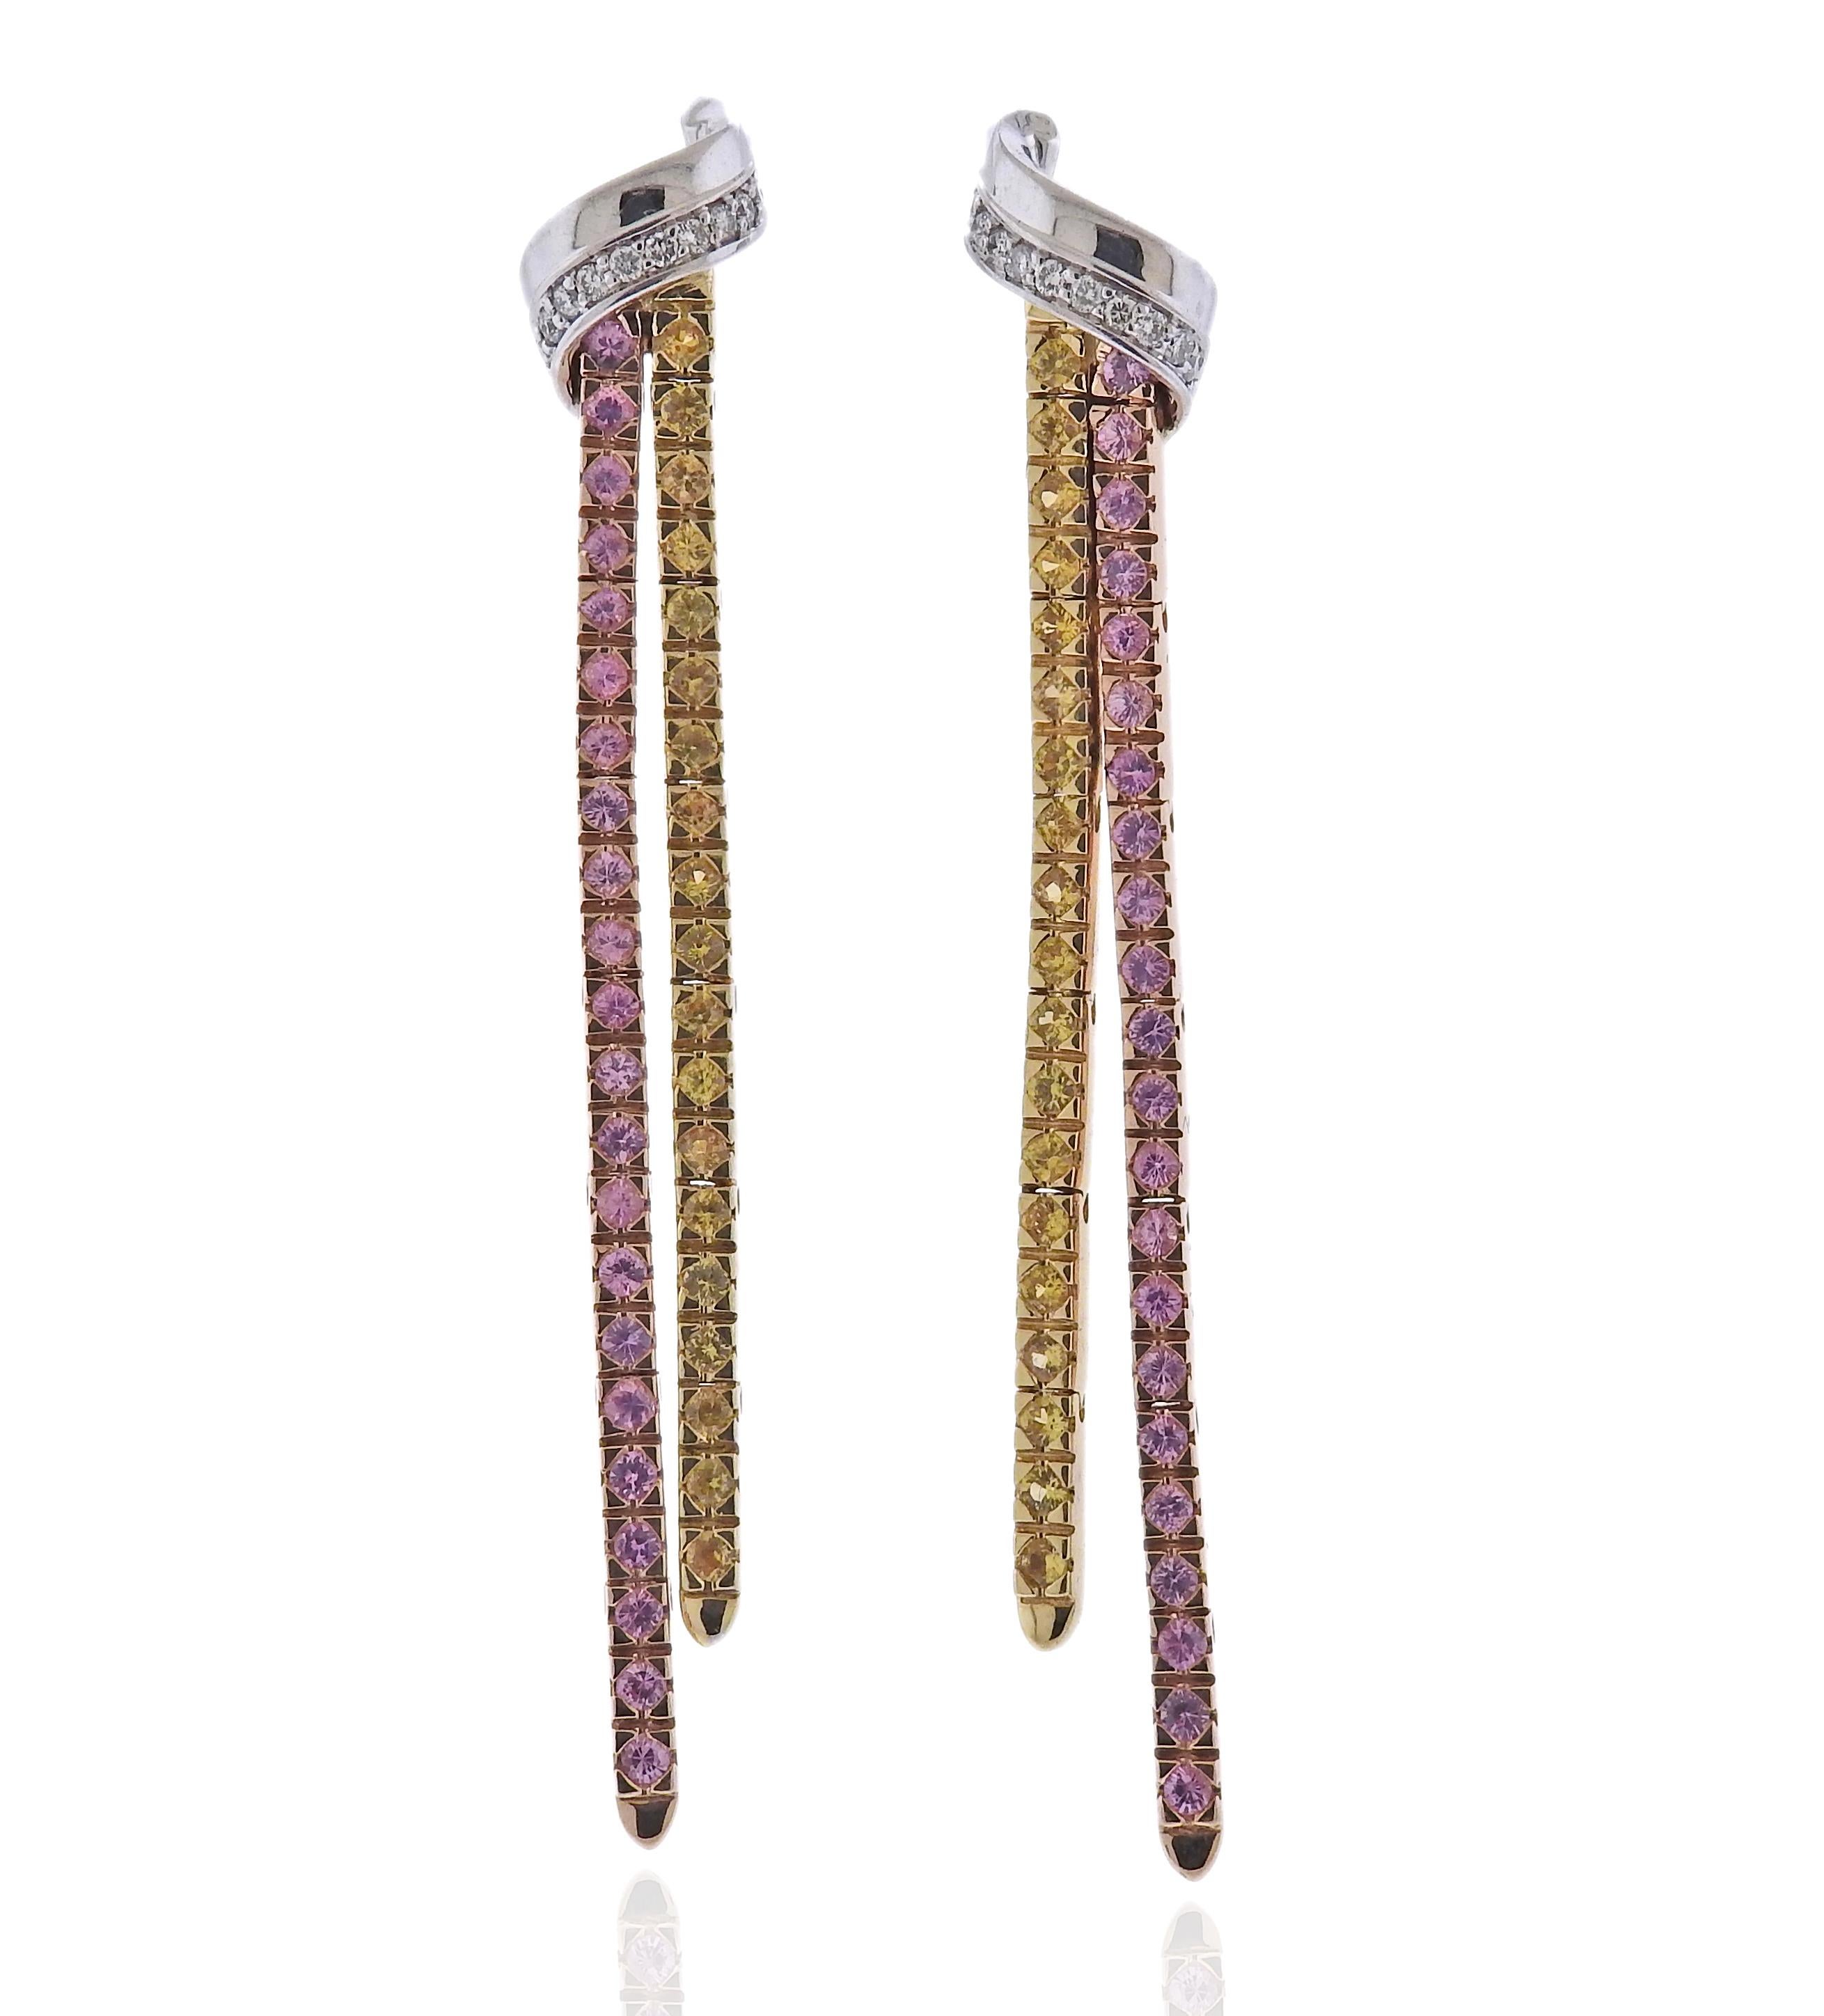 18k gold Feraud earrings with pink sapphires and approx. 0.20ctw in diamonds. Earrings are 63mm x 10mm, missing backs. Weight 12.4 grams. Marked: 18kt. Feraud. 